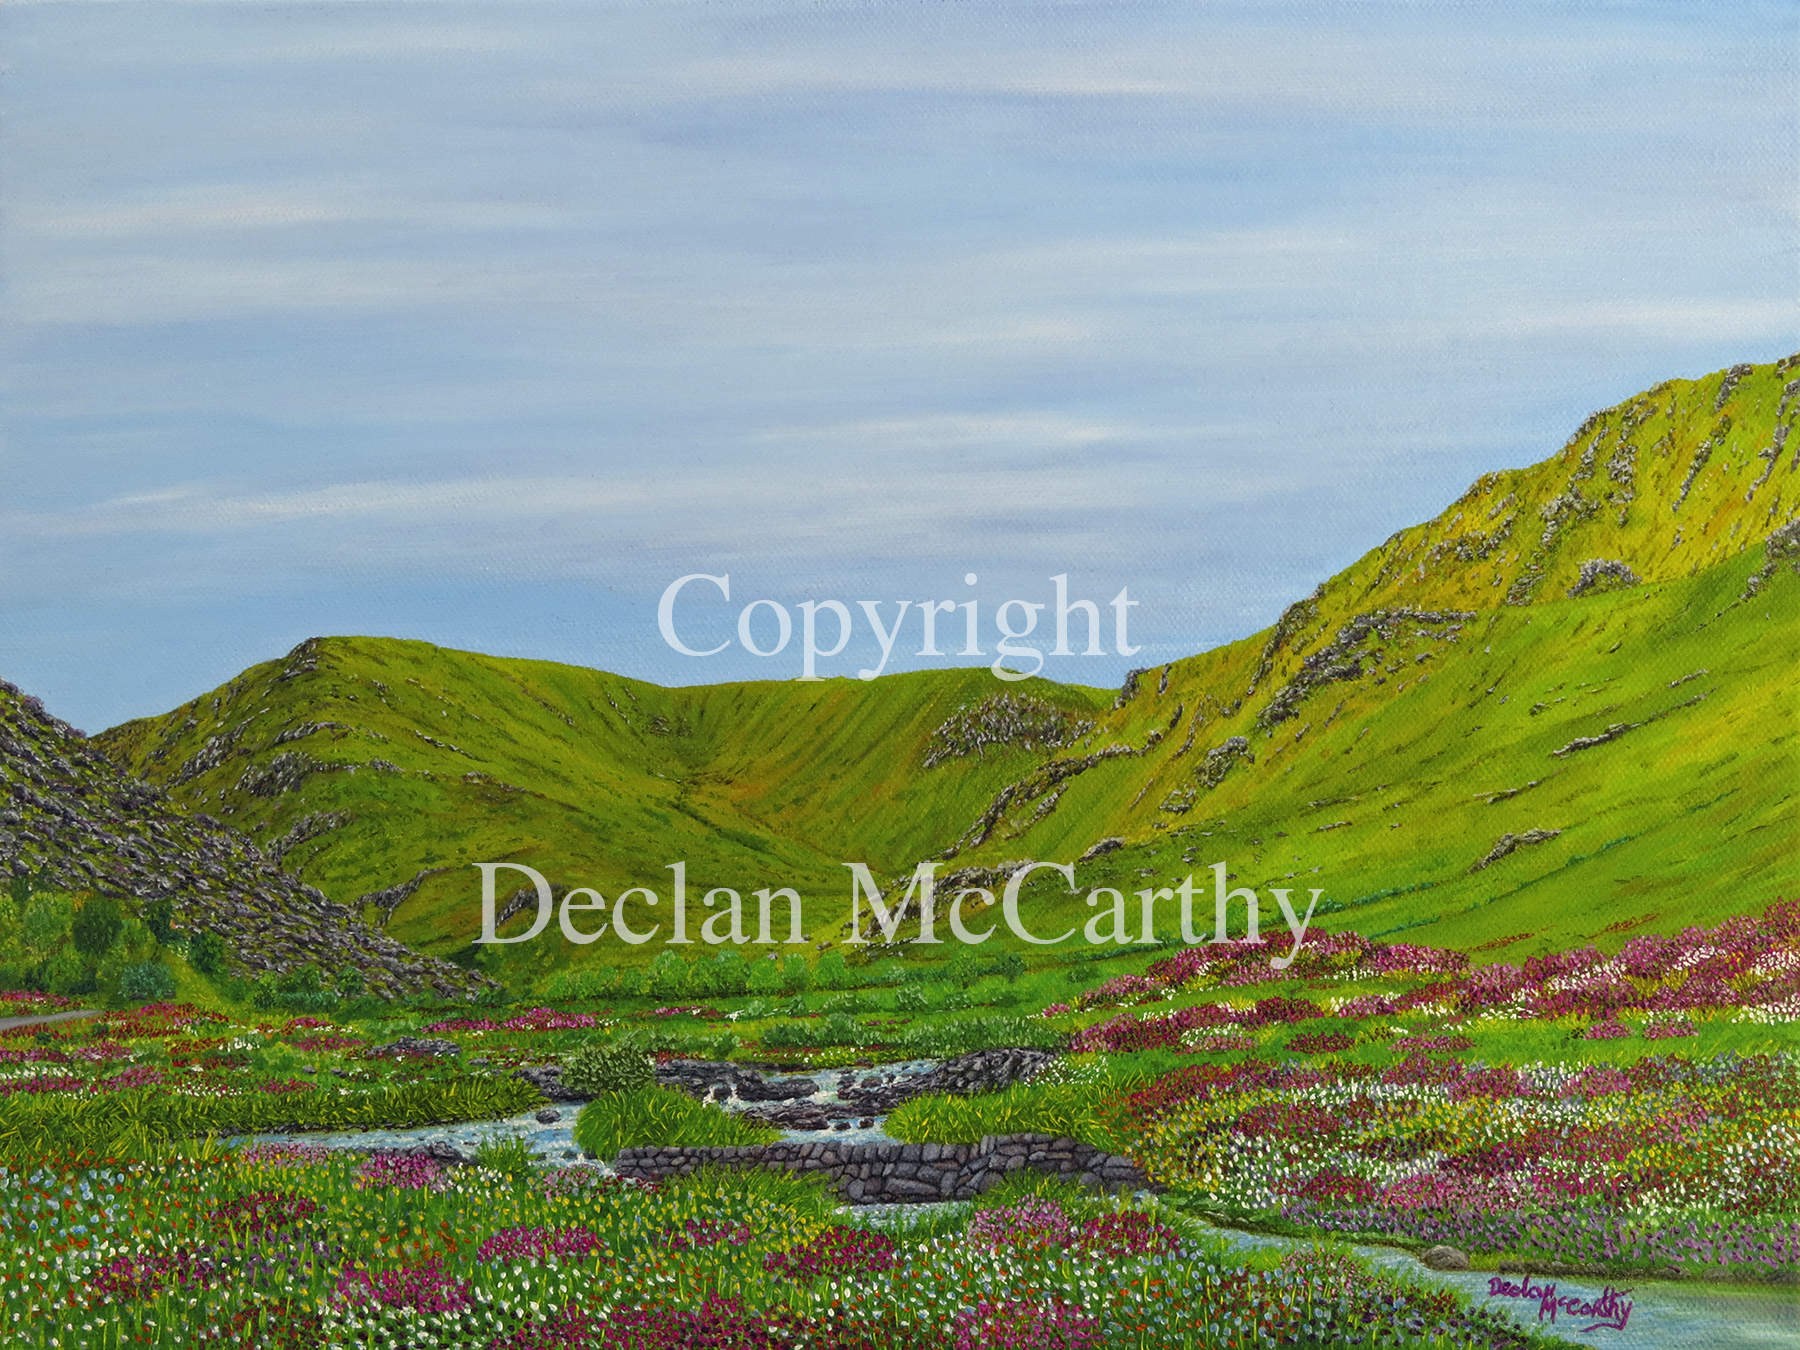 Doo Lough Valley, Co. Mayo. The scene of a tragedy during the famine, hence the wildflowers I added